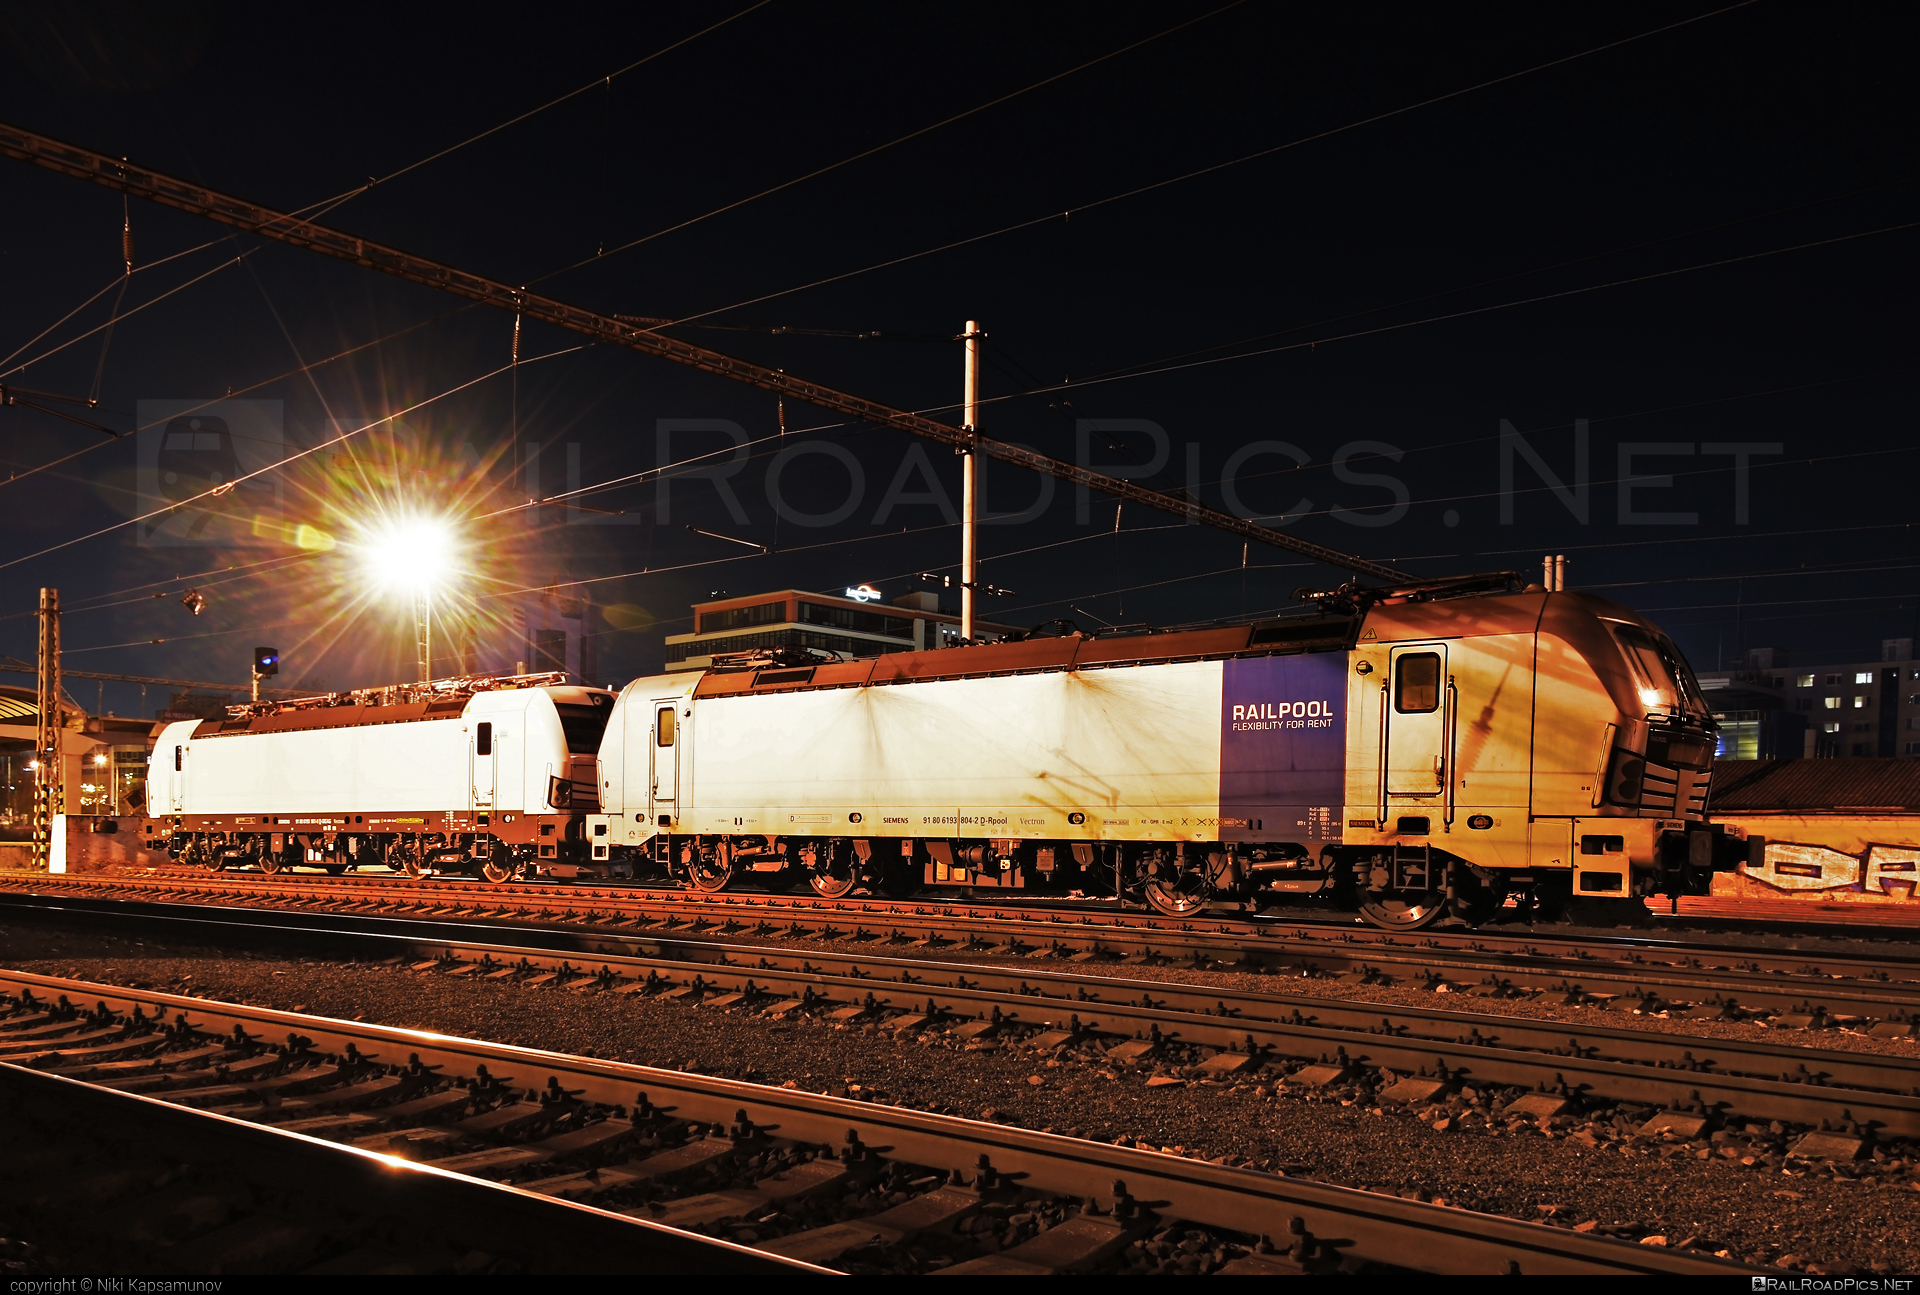 Siemens Vectron AC - 193 804-2 operated by ecco-rail GmbH #eccorail #eccorailgmbh #railpool #railpoolgmbh #siemens #siemensvectron #siemensvectronac #vectron #vectronac